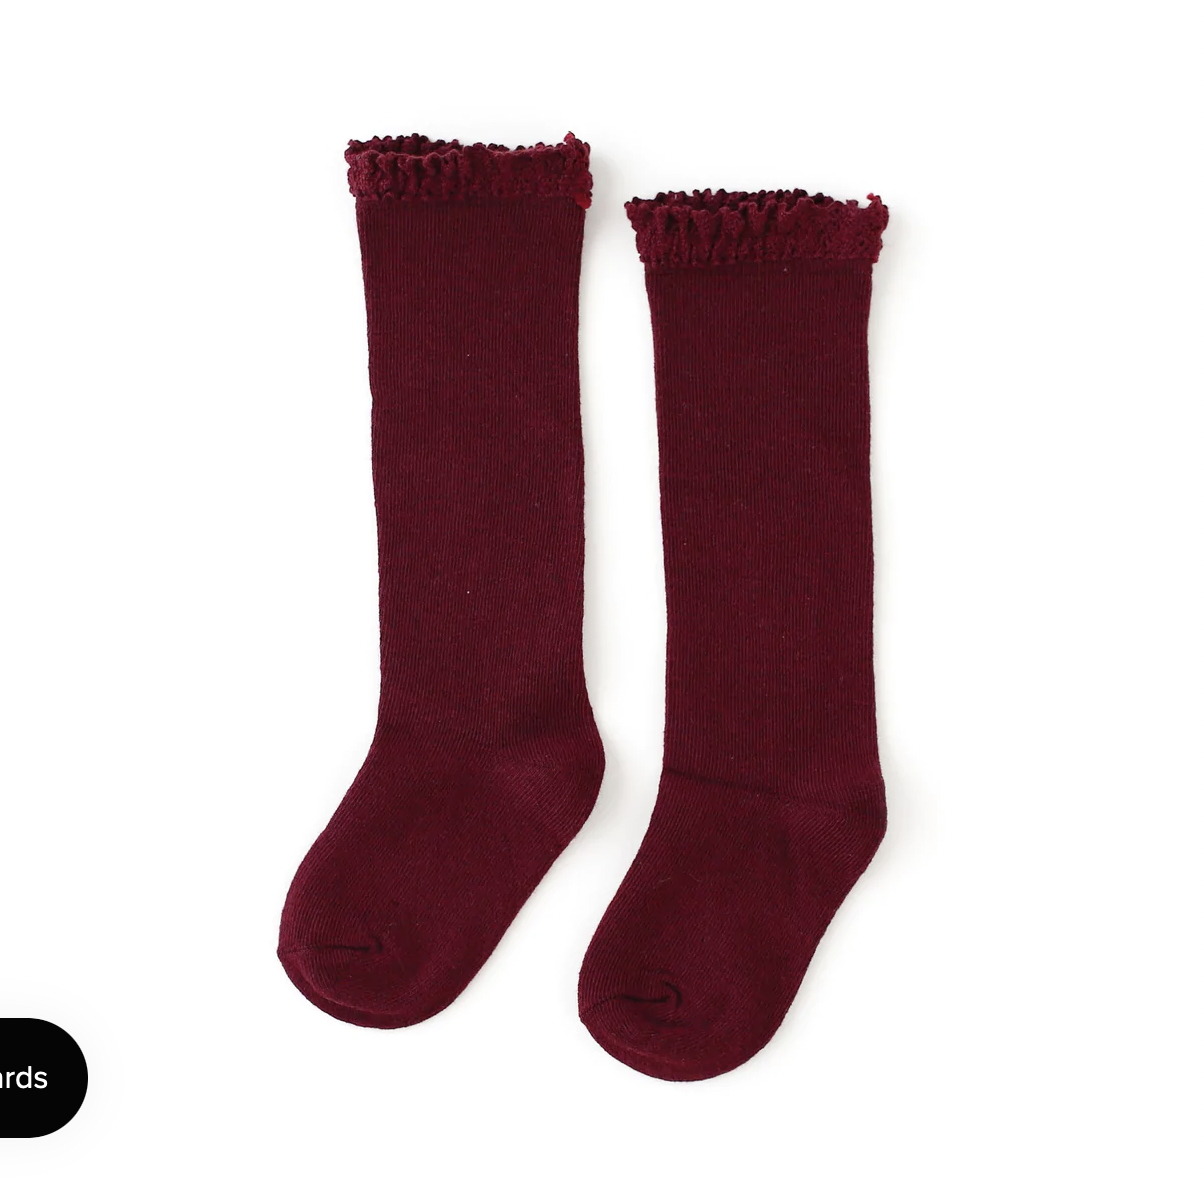 Little Stocking Co. Lace Top Knee High Socks- Wine